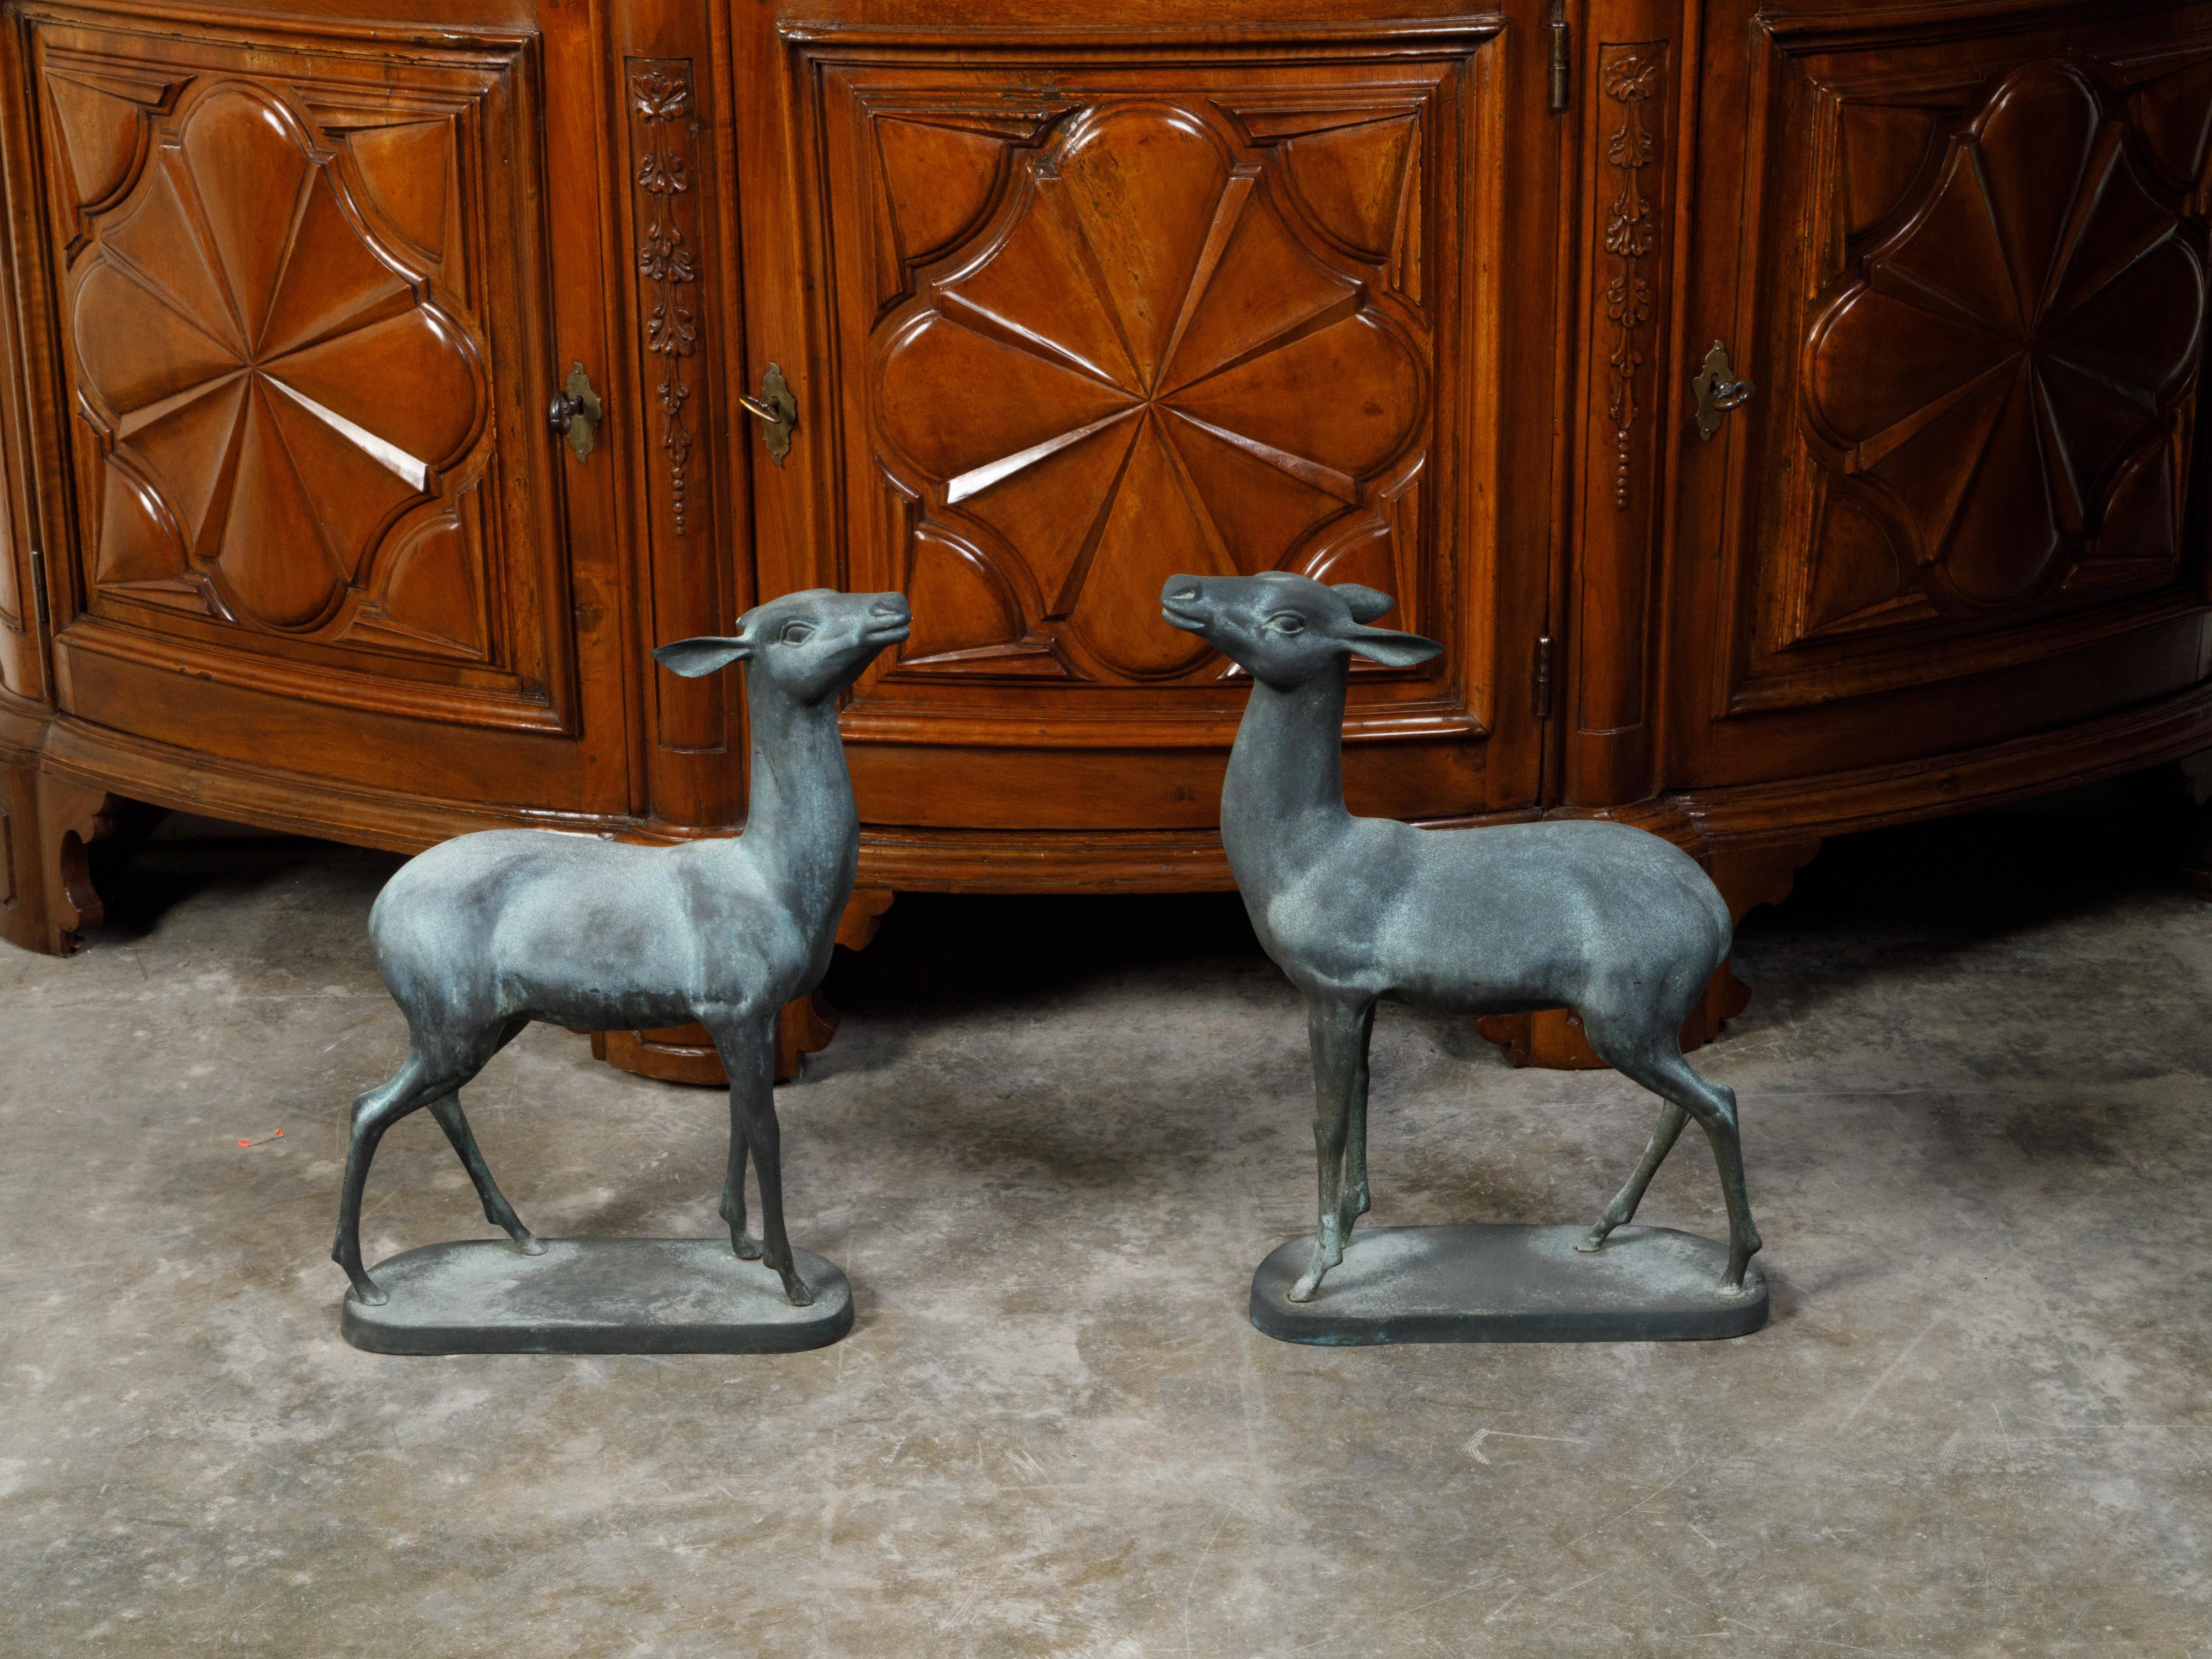 A vintage pair of Italian bronze deer sculptures from the mid 20th century, with bases. Created in Italy during the Midcentury period, this pair of Italian bronze sculptures captures our attention with its lovely depiction of two small deer standing